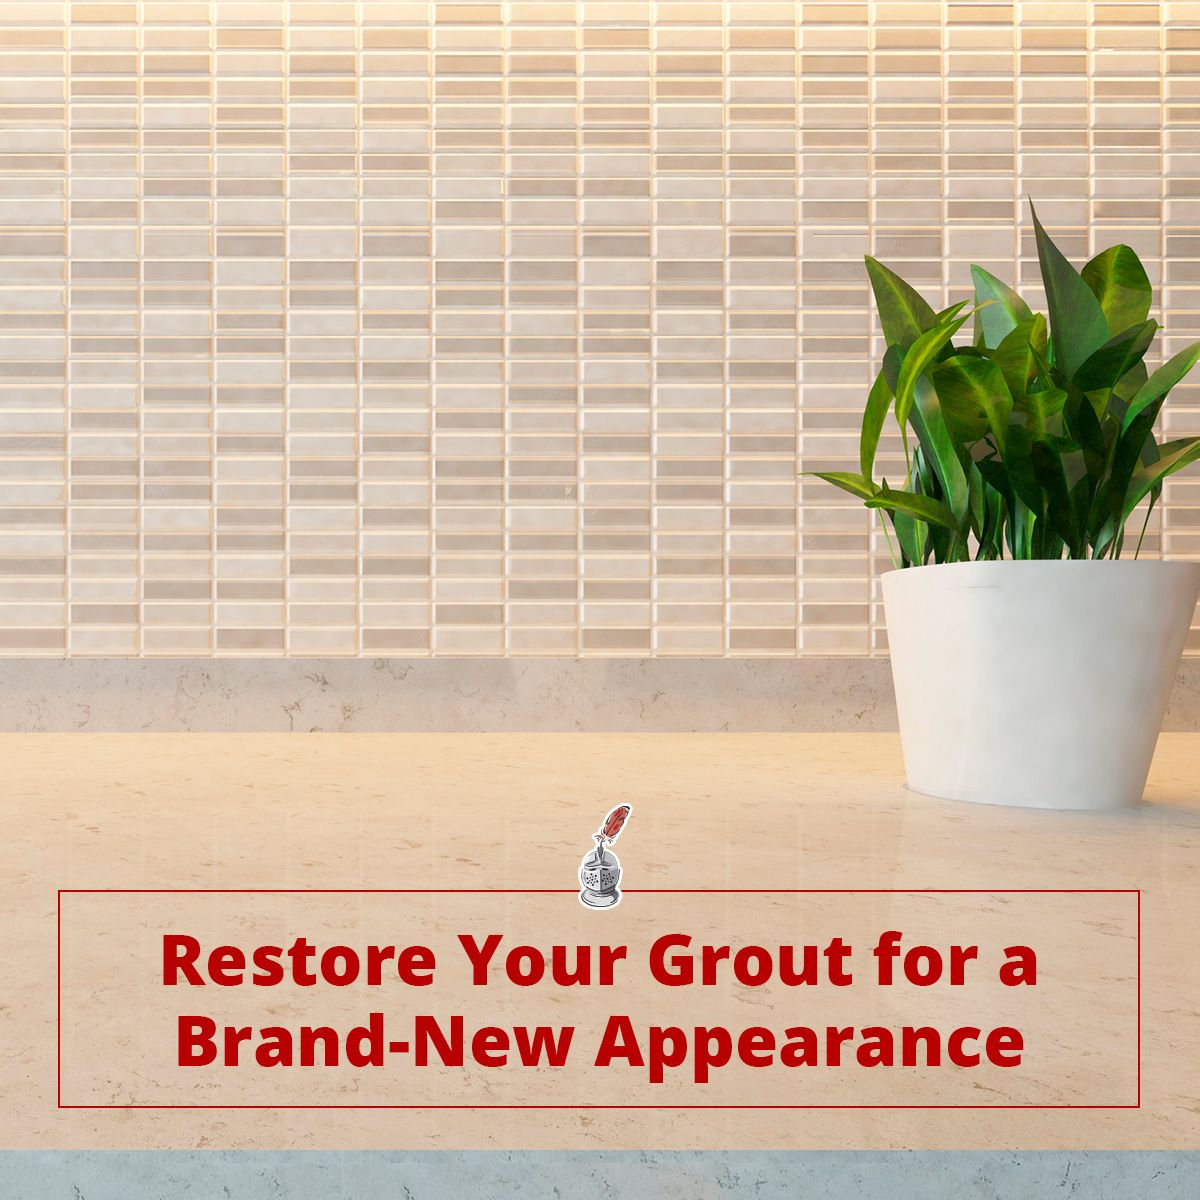 Restore Your Grout for a Brand-New Appearance